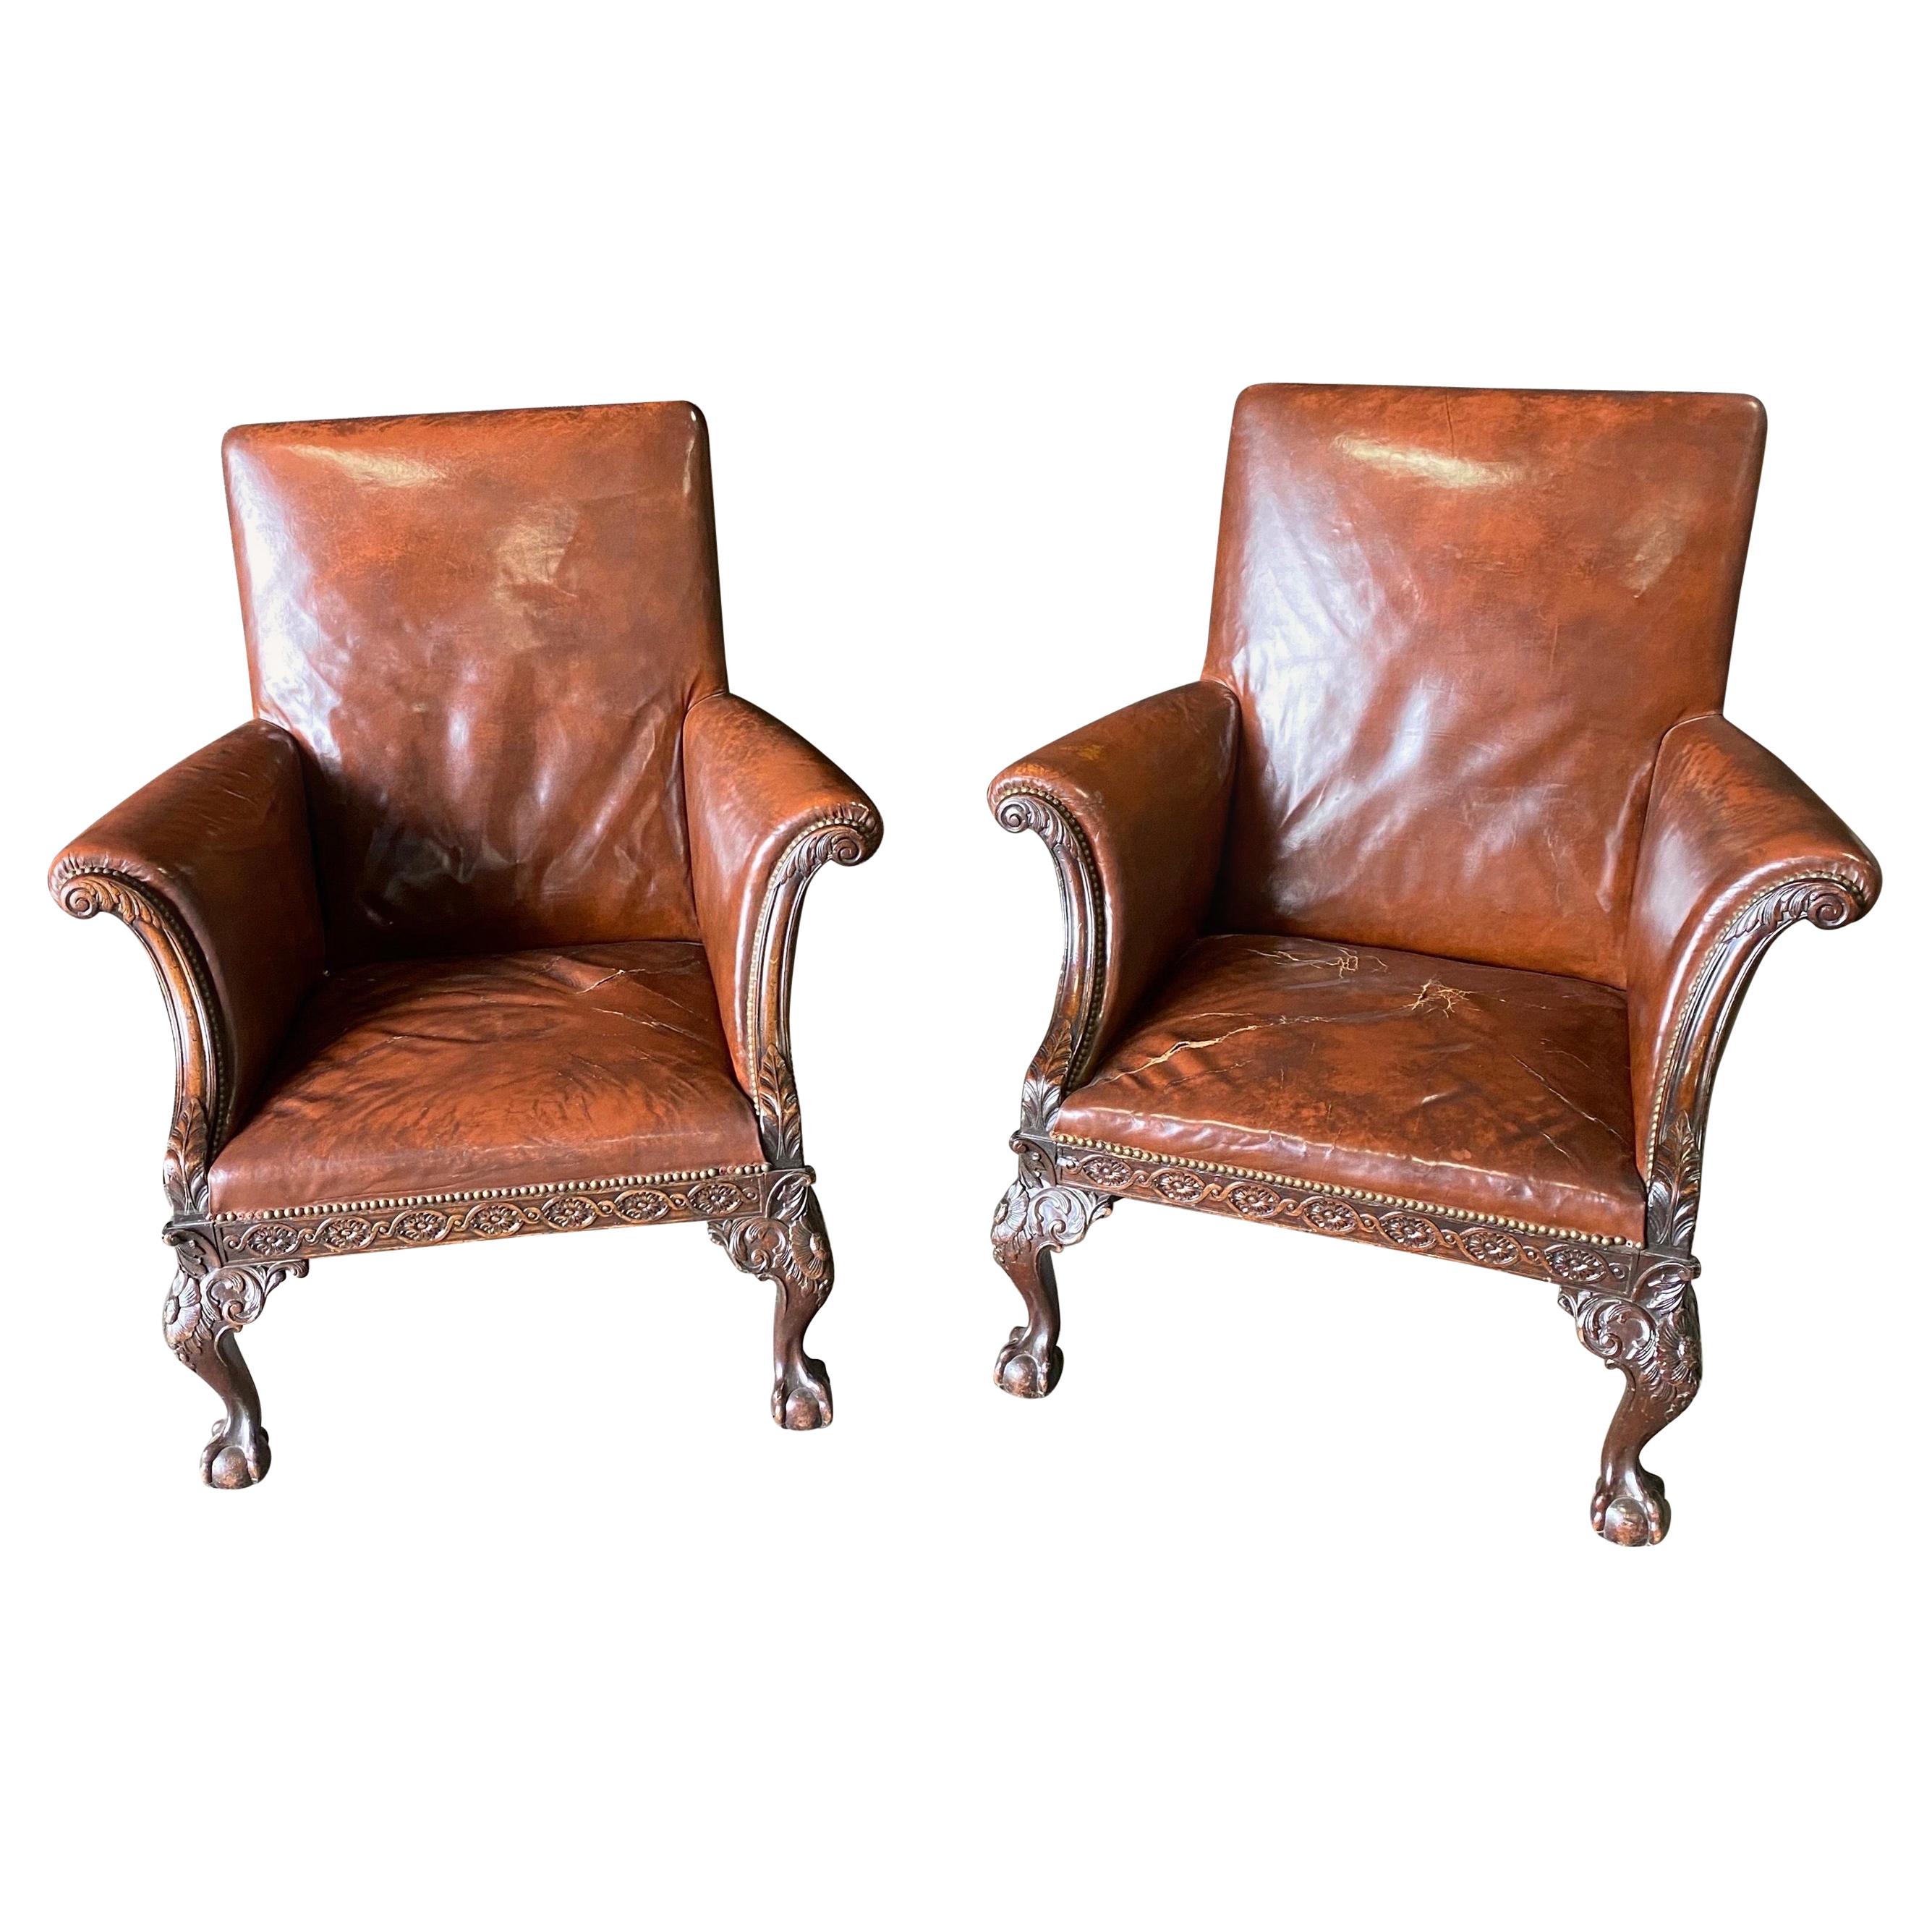 Great Pair of 19th Century English Mahogany and Leather Armchairs